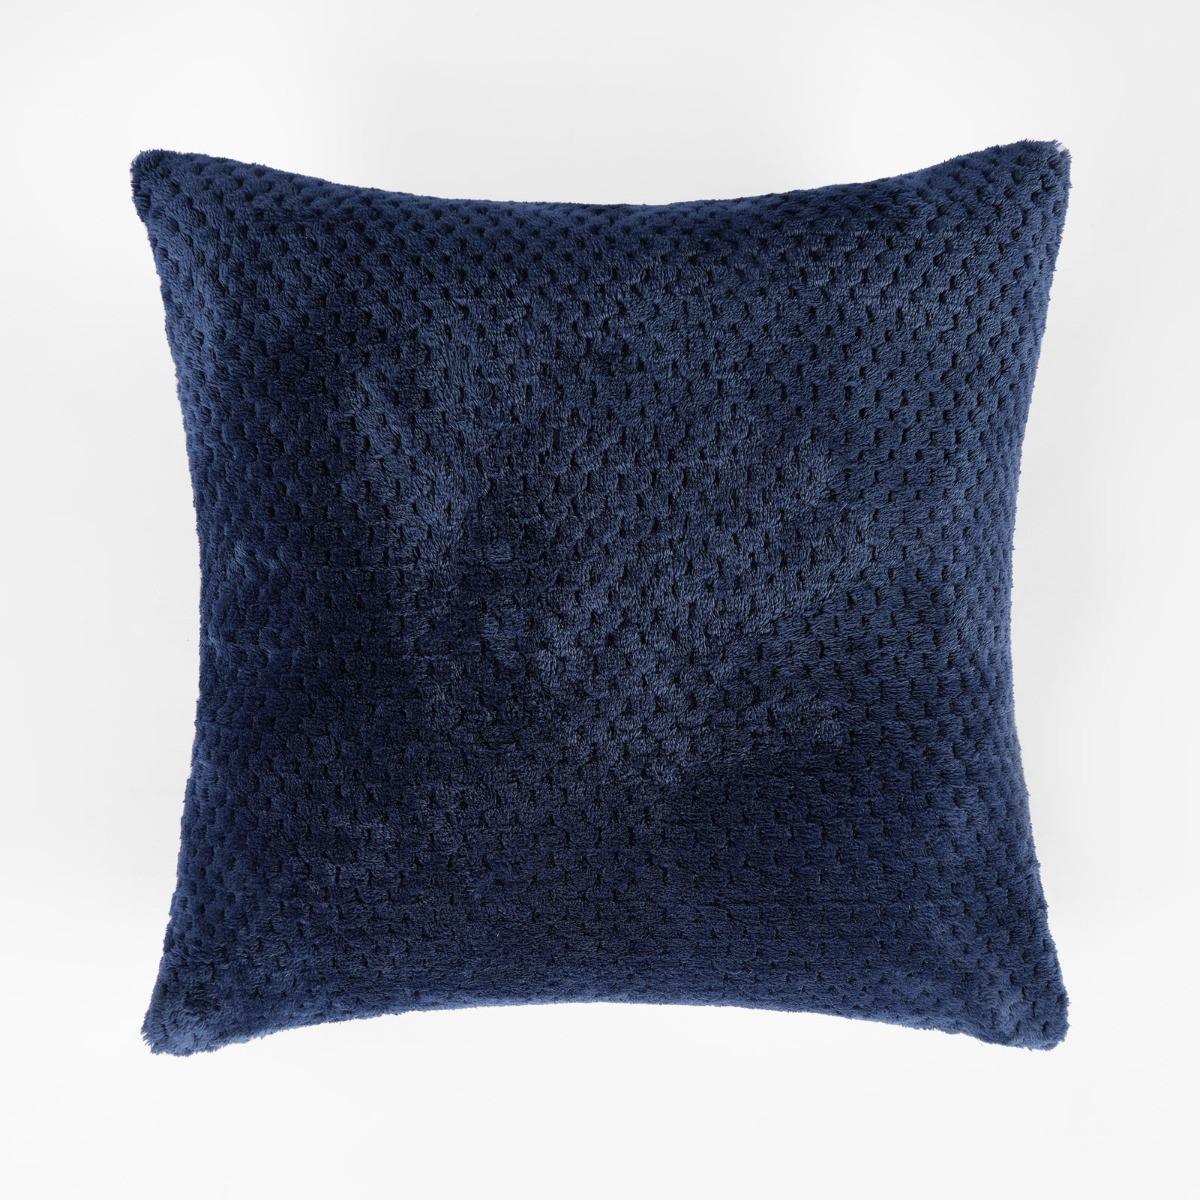 Brentfords 2 Pack Waffle Fleece Cushion Covers, Navy - 45 x 45cm>